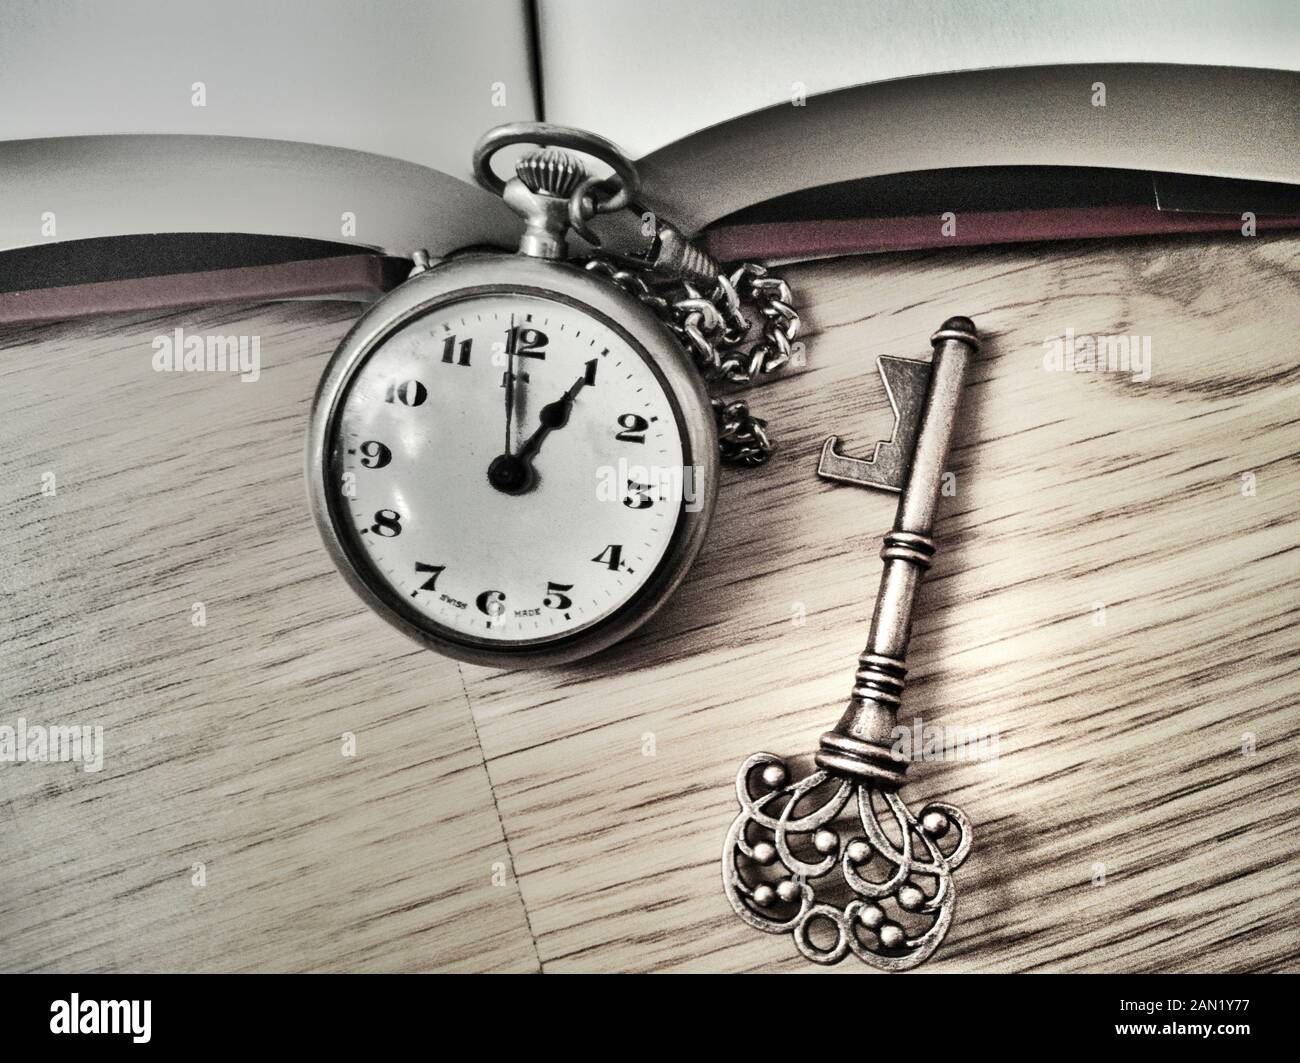 detail of antique pocket watch and key on oak wood floor and textbook Stock Photo